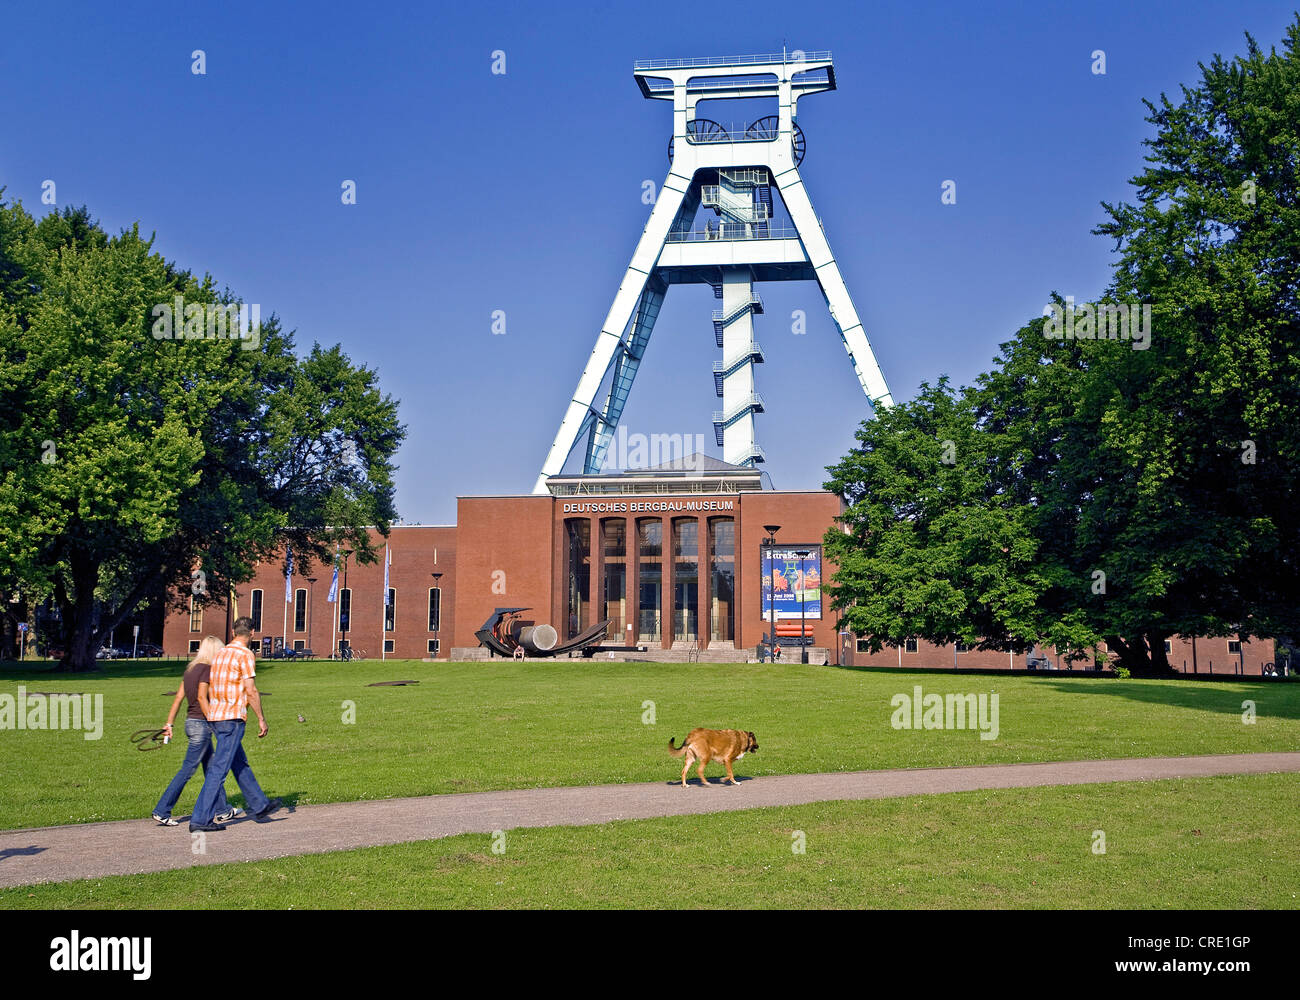 a couple walking with the dog in front of the German Mining Museum, Germany, North Rhine-Westphalia, Ruhr Area, Bochum Stock Photo